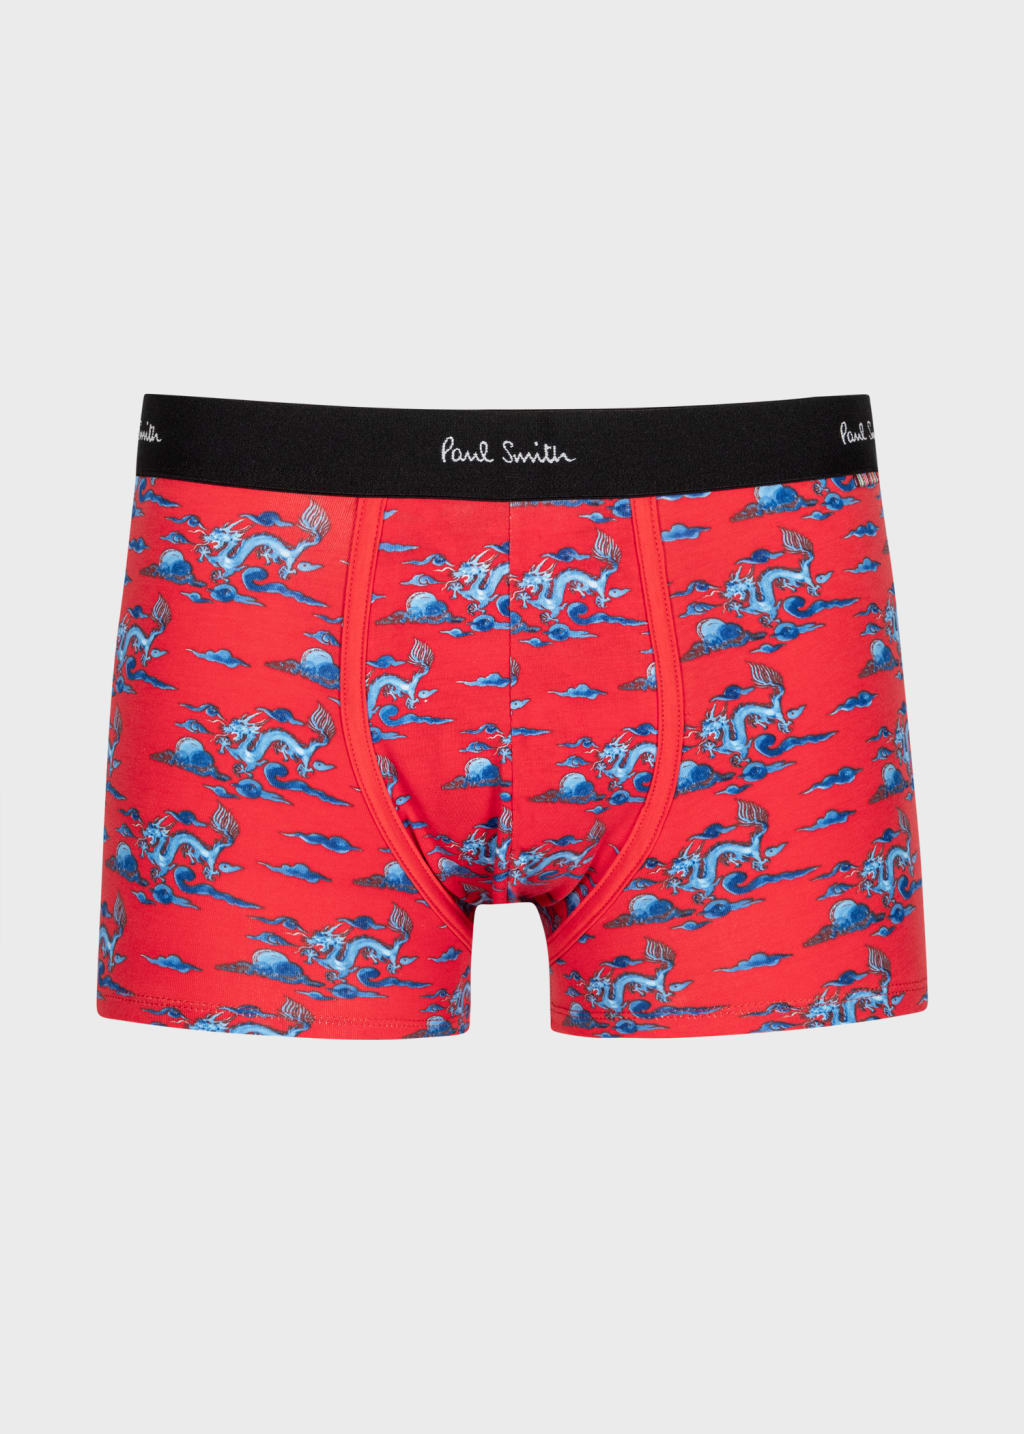 Front View - Red 'Year Of The Dragon' Boxer Briefs Paul Smith